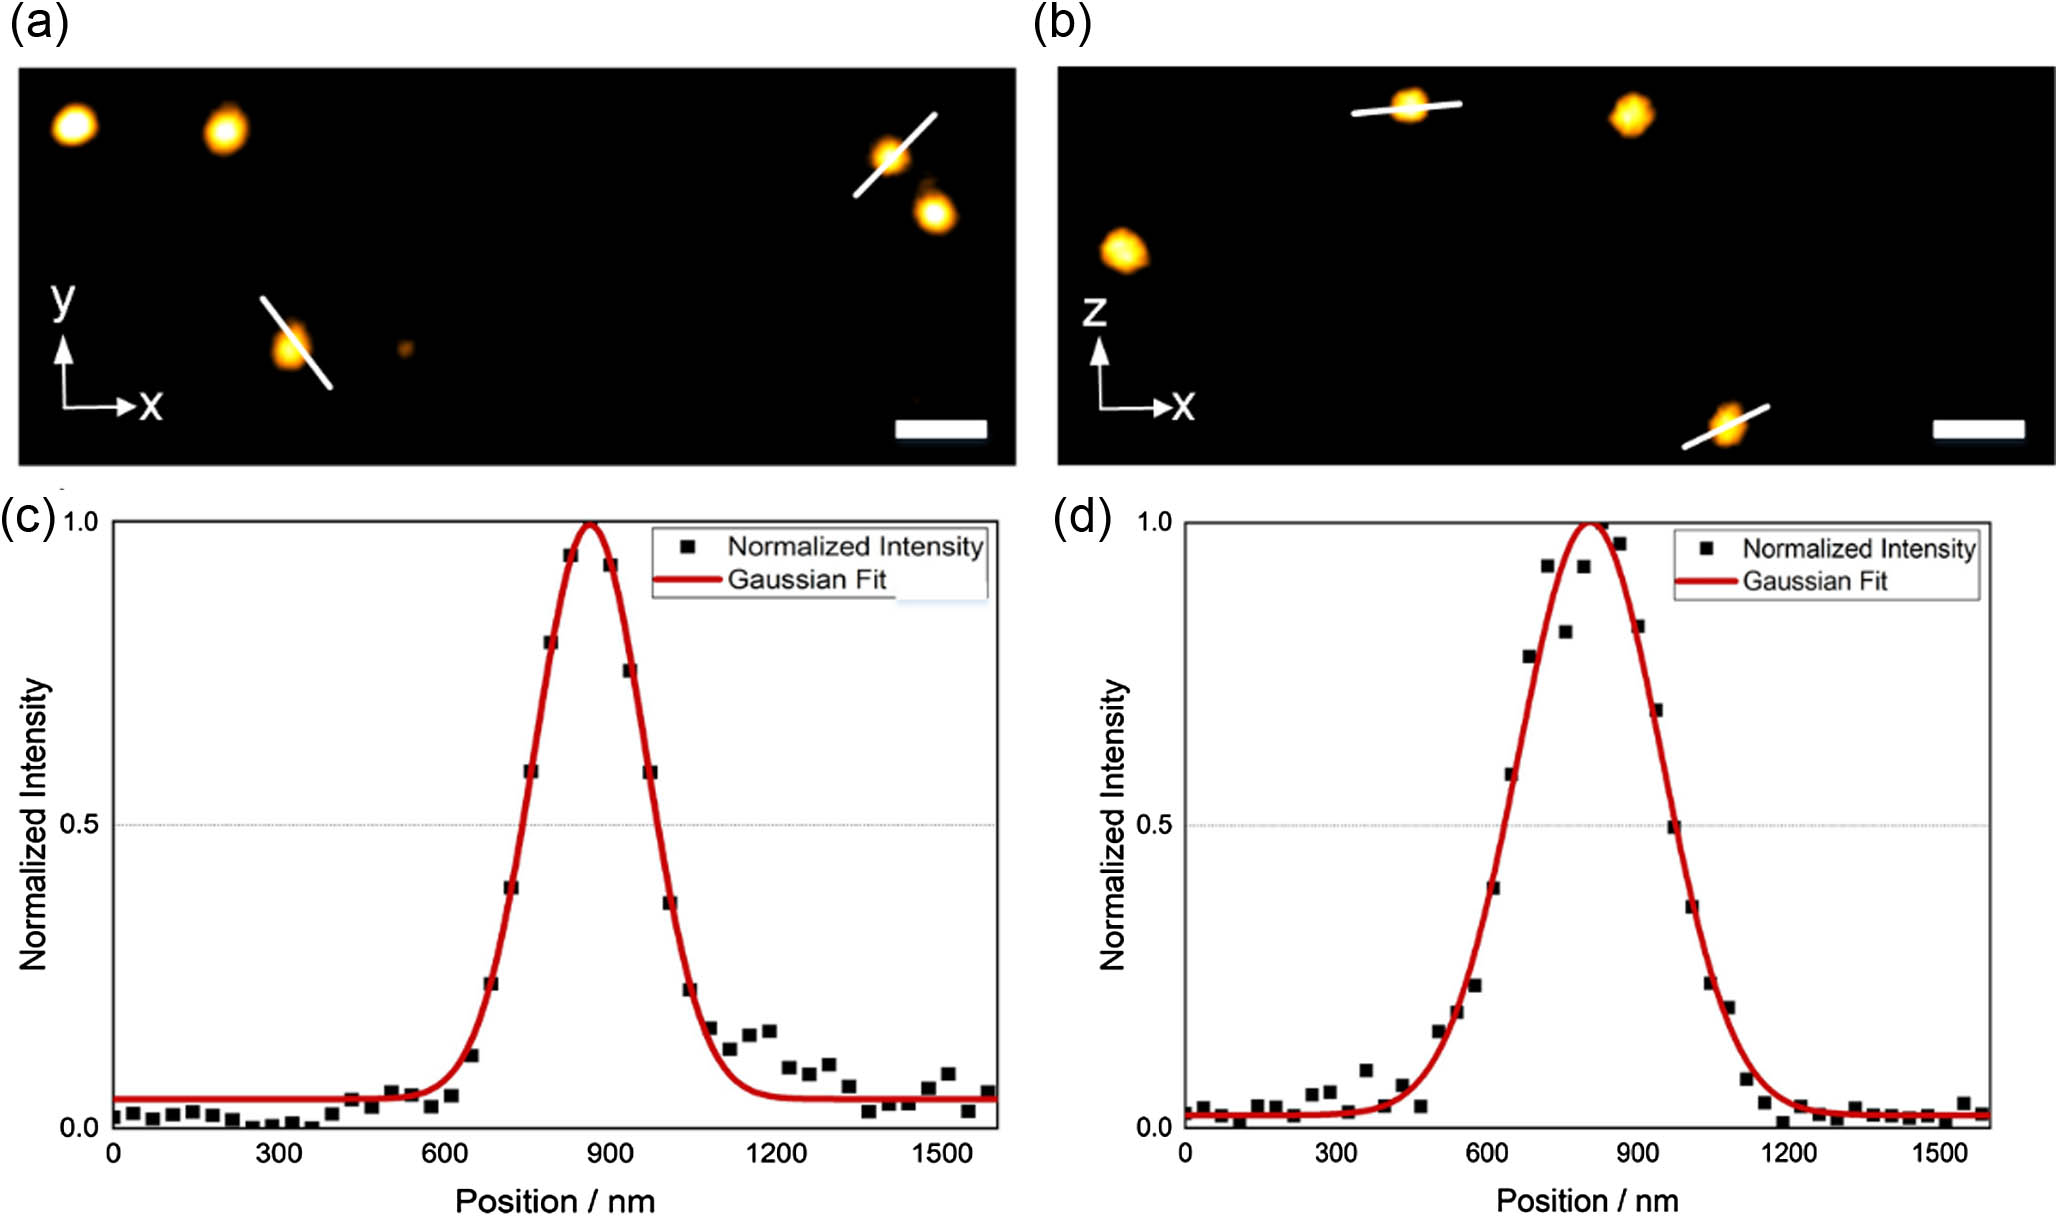 Characterization of the microscope. Representative PSF was obtained by imaging 80 nm fluorescence beads. Projections along XY and XZ are shown in (a) and (b). The Gauss fit curve of the line profiles of the PSF is shown in (c) and (d); the FWHM is 290 nm in X and 310 nm in Z, respectively.